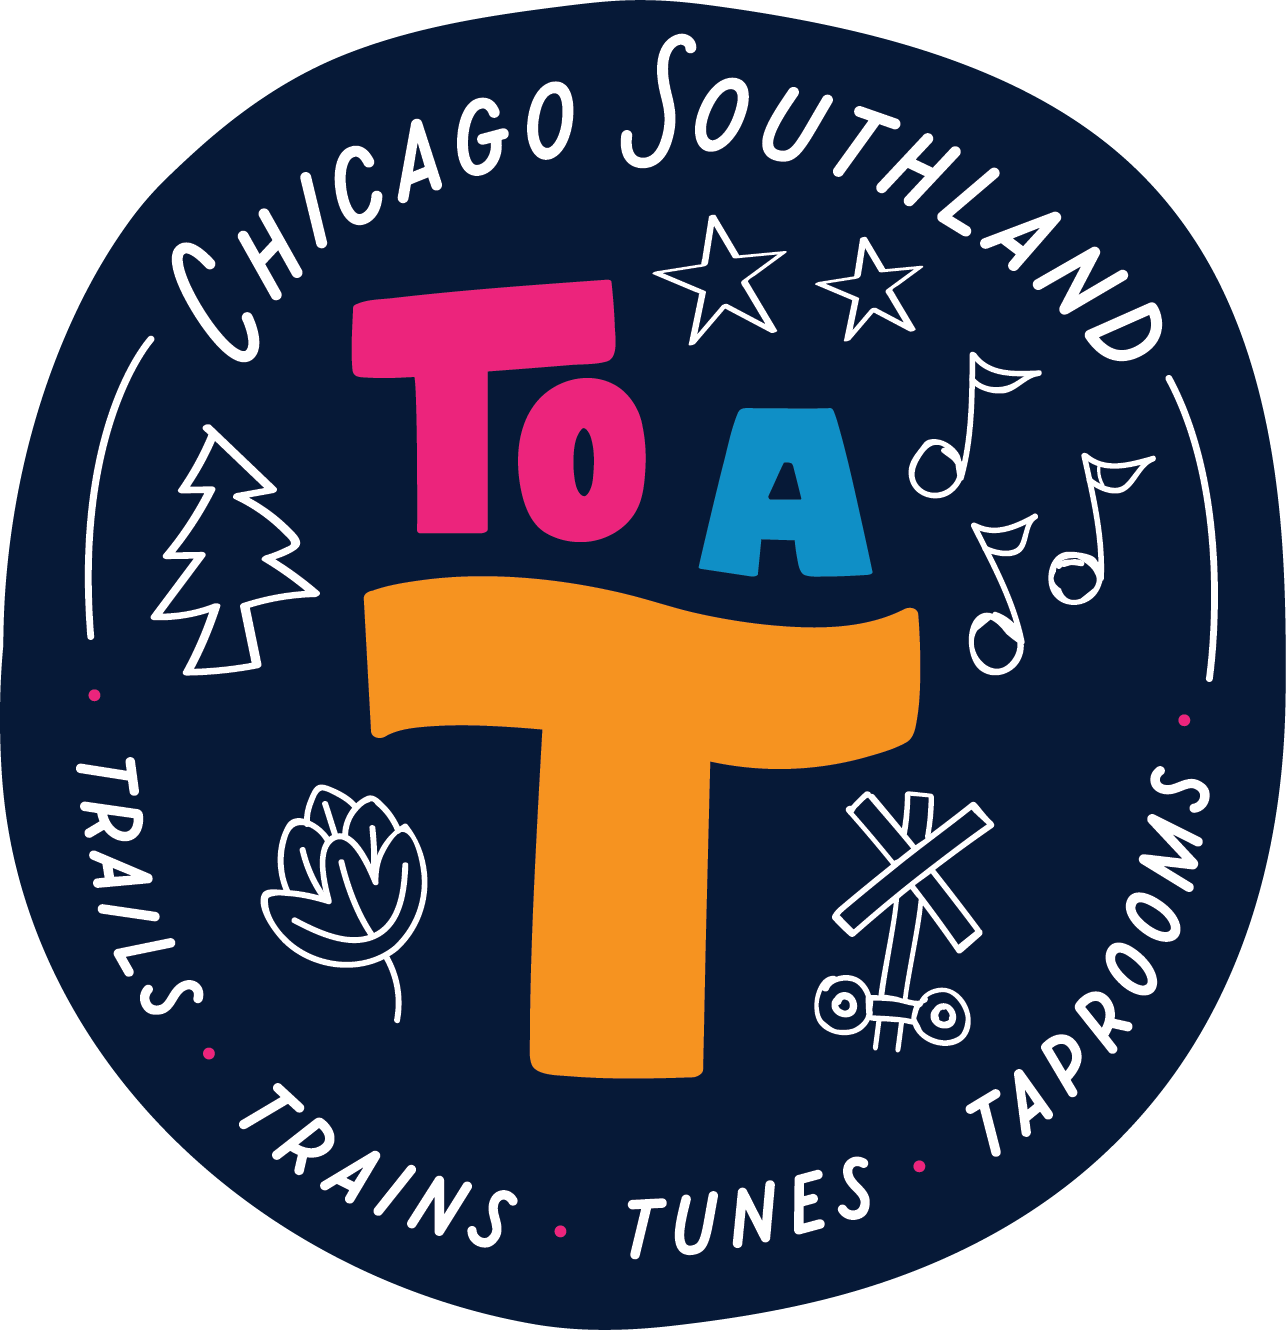 Trails, Trains, Tunes & Taprooms